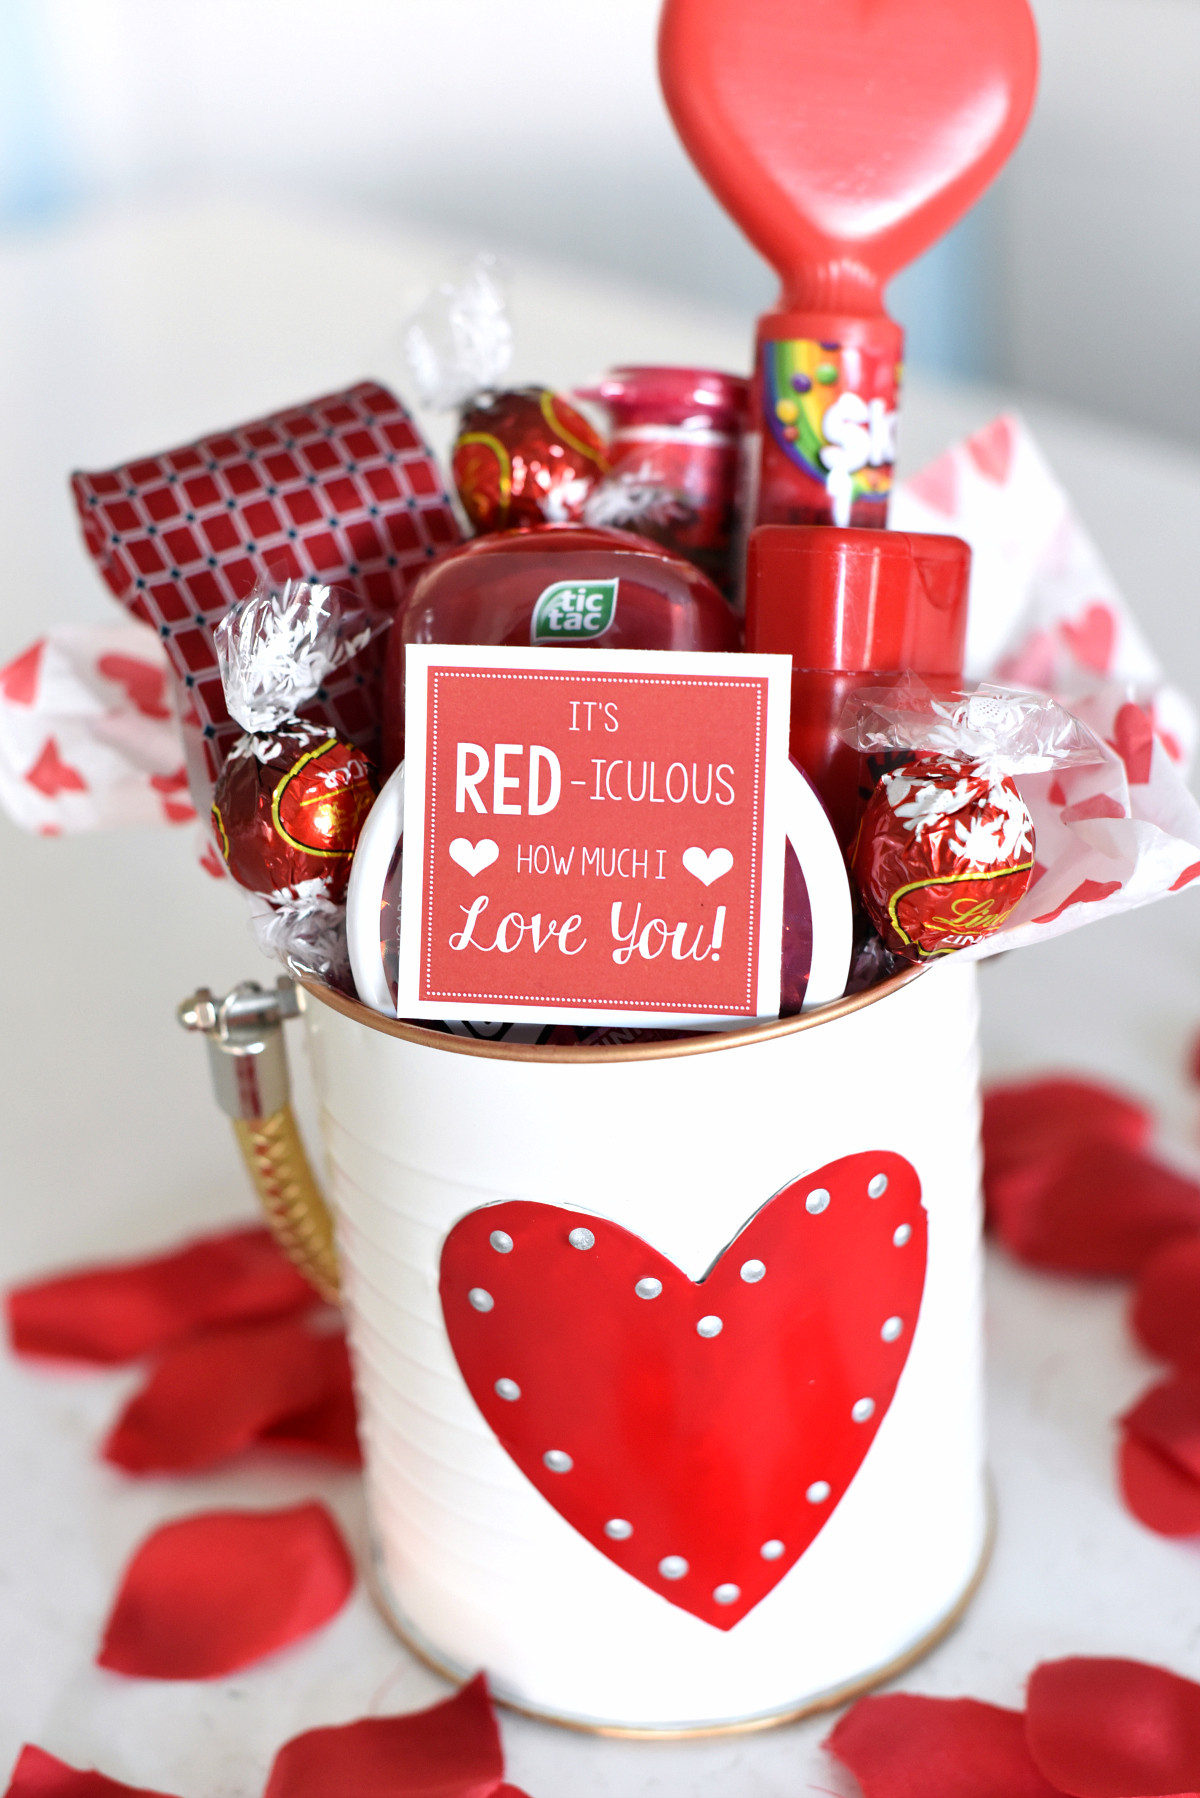 Romantic Valentines Day Gift Ideas For Her
 25 DIY Valentine s Day Gift Ideas Teens Will Love